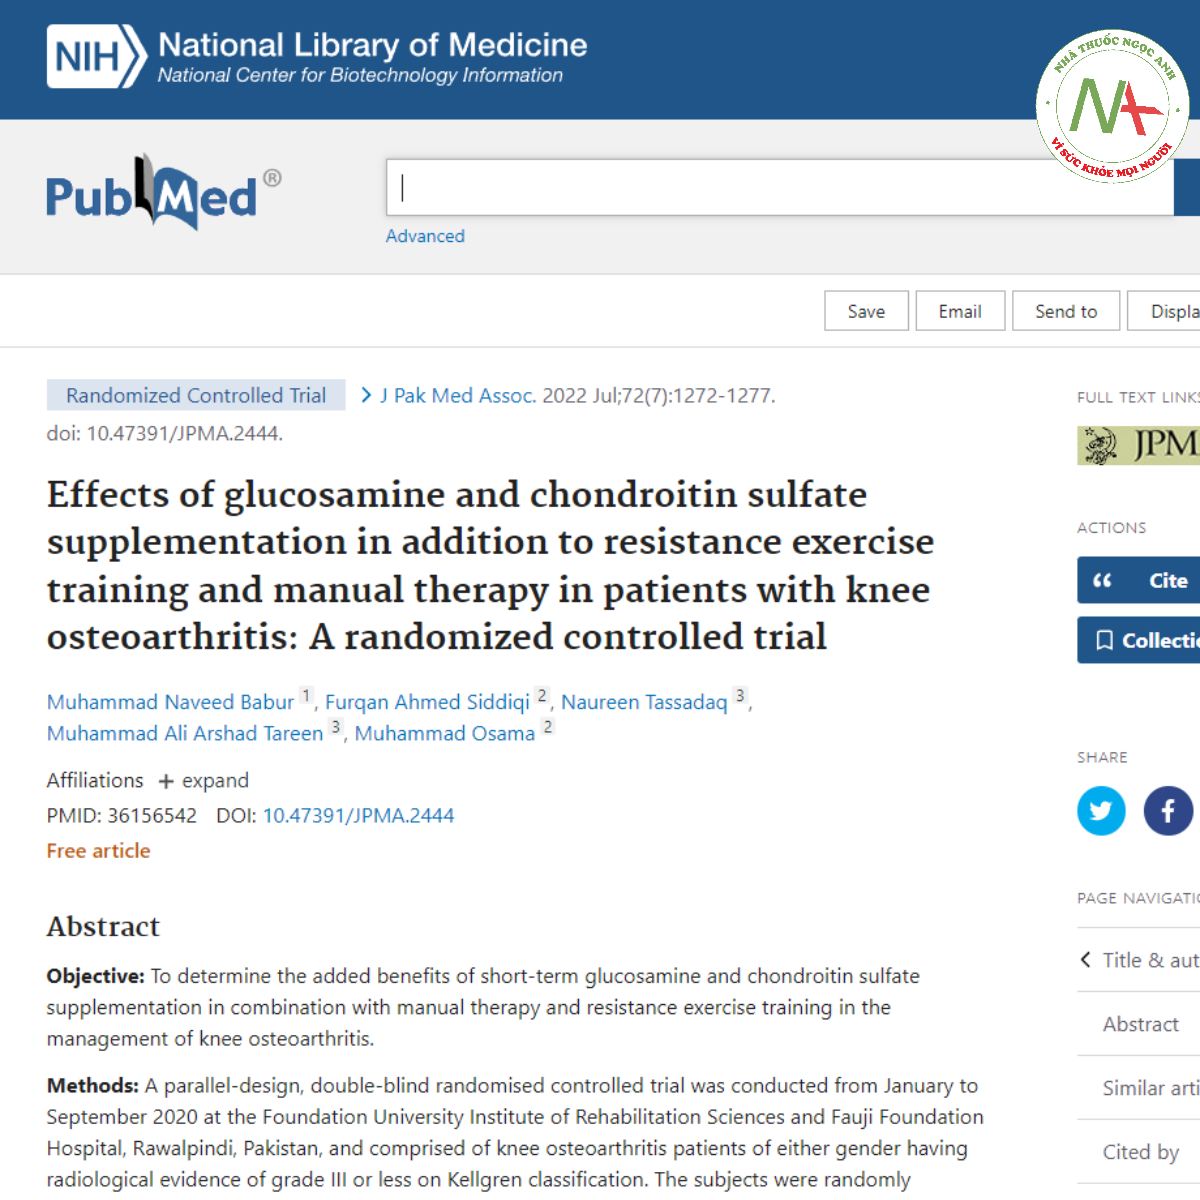 Effects of glucosamine and chondroitin sulfate supplementation in addition to resistance exercise training and manual therapy in patients with knee osteoarthritis: A randomized controlled trial